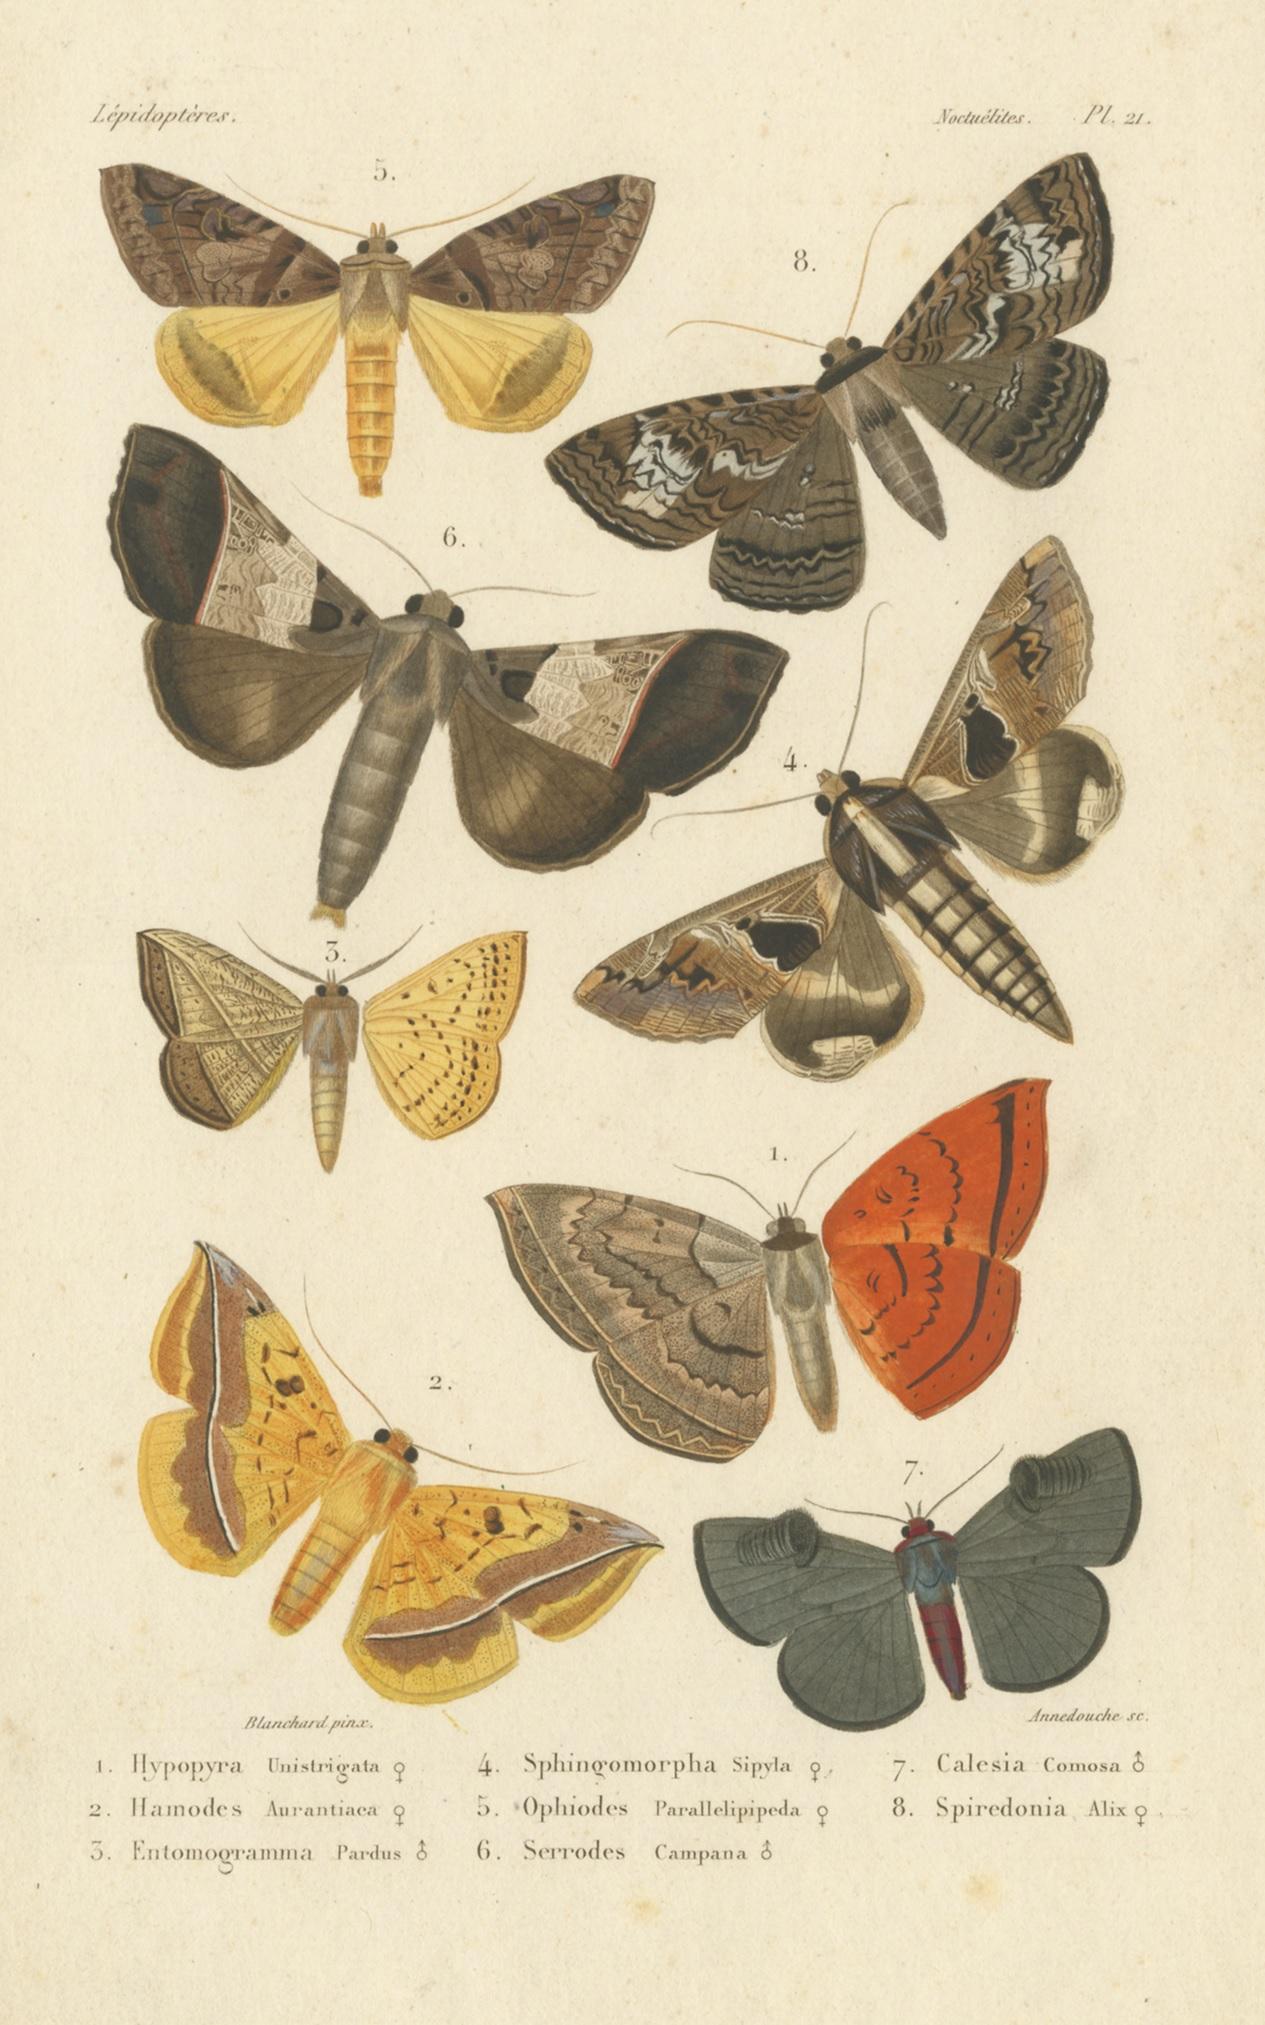 Antique print titled 'Lépidoptères - Noctuélites'. Lithograph of various butterflies and moths. This print originates from 'Histoire naturelle des insectes' by Jean Alphonse Boisduval. Engraved by Annedouche after Blanchard. Published in 1836.